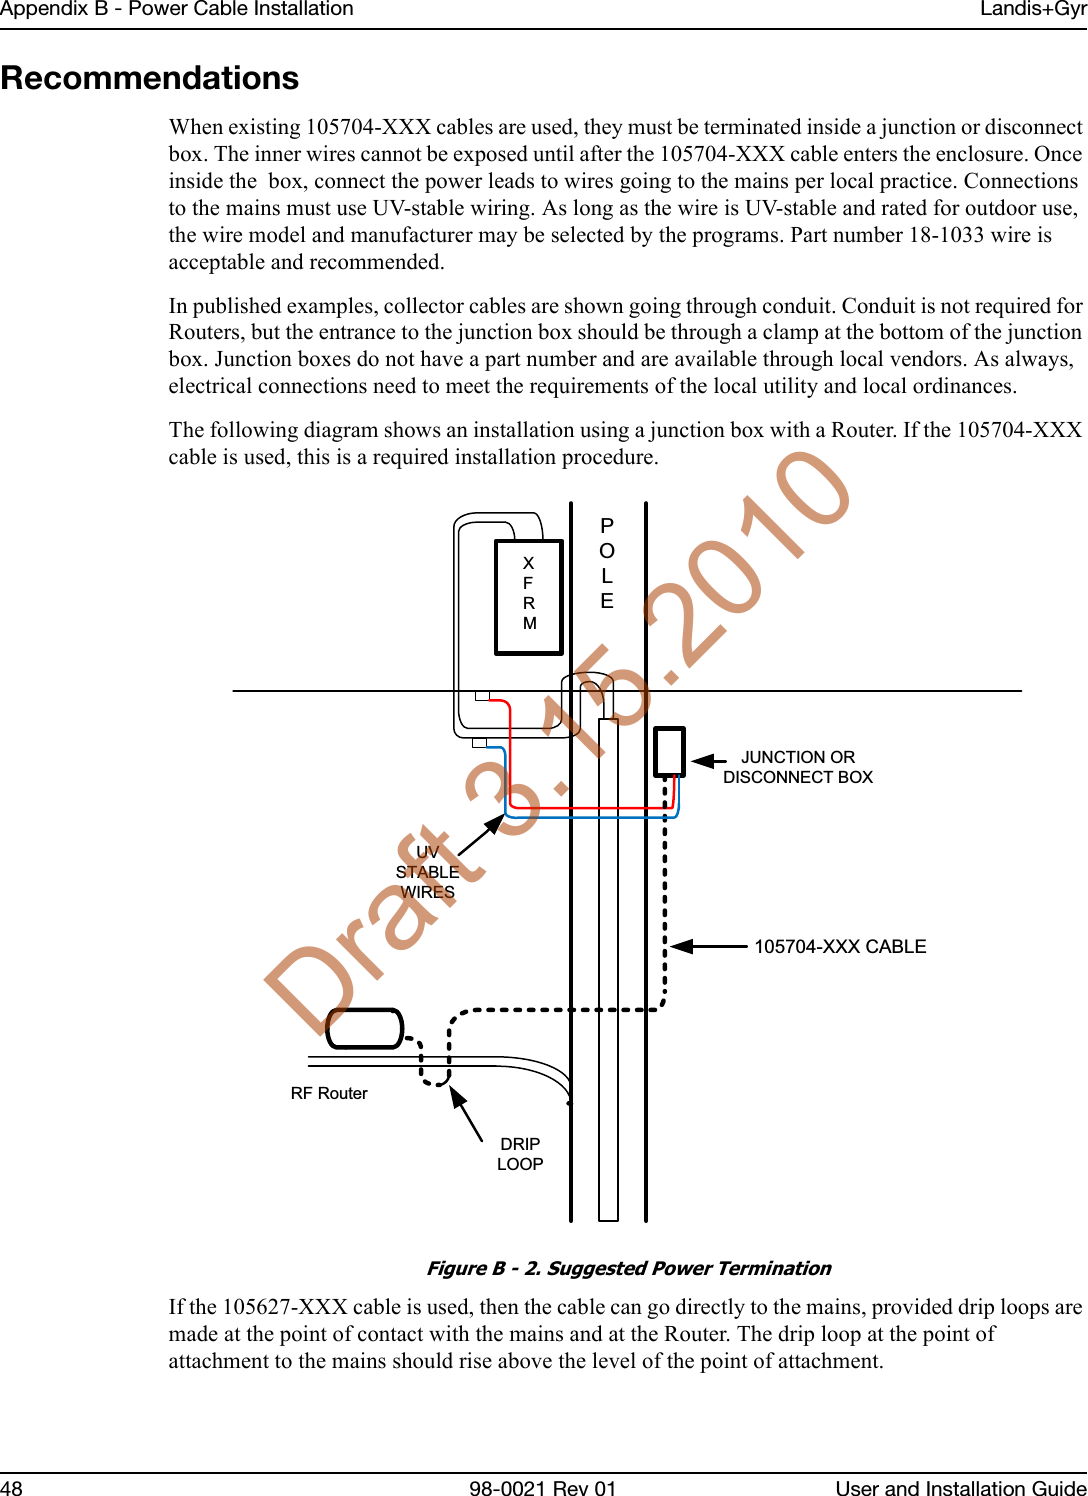 Appendix B - Power Cable Installation Landis+Gyr48 98-0021 Rev 01 User and Installation GuideRecommendationsWhen existing 105704-XXX cables are used, they must be terminated inside a junction or disconnect box. The inner wires cannot be exposed until after the 105704-XXX cable enters the enclosure. Once inside the  box, connect the power leads to wires going to the mains per local practice. Connections to the mains must use UV-stable wiring. As long as the wire is UV-stable and rated for outdoor use, the wire model and manufacturer may be selected by the programs. Part number 18-1033 wire is acceptable and recommended.In published examples, collector cables are shown going through conduit. Conduit is not required for Routers, but the entrance to the junction box should be through a clamp at the bottom of the junction box. Junction boxes do not have a part number and are available through local vendors. As always, electrical connections need to meet the requirements of the local utility and local ordinances.  The following diagram shows an installation using a junction box with a Router. If the 105704-XXX cable is used, this is a required installation procedure. Figure B - 2. Suggested Power Termination If the 105627-XXX cable is used, then the cable can go directly to the mains, provided drip loops are made at the point of contact with the mains and at the Router. The drip loop at the point of attachment to the mains should rise above the level of the point of attachment.  RF RouterPOLEXFRMJUNCTION OR DISCONNECT BOX105704-XXX CABLEUV STABLE WIRESDRIP LOOPDraft 3.15.2010